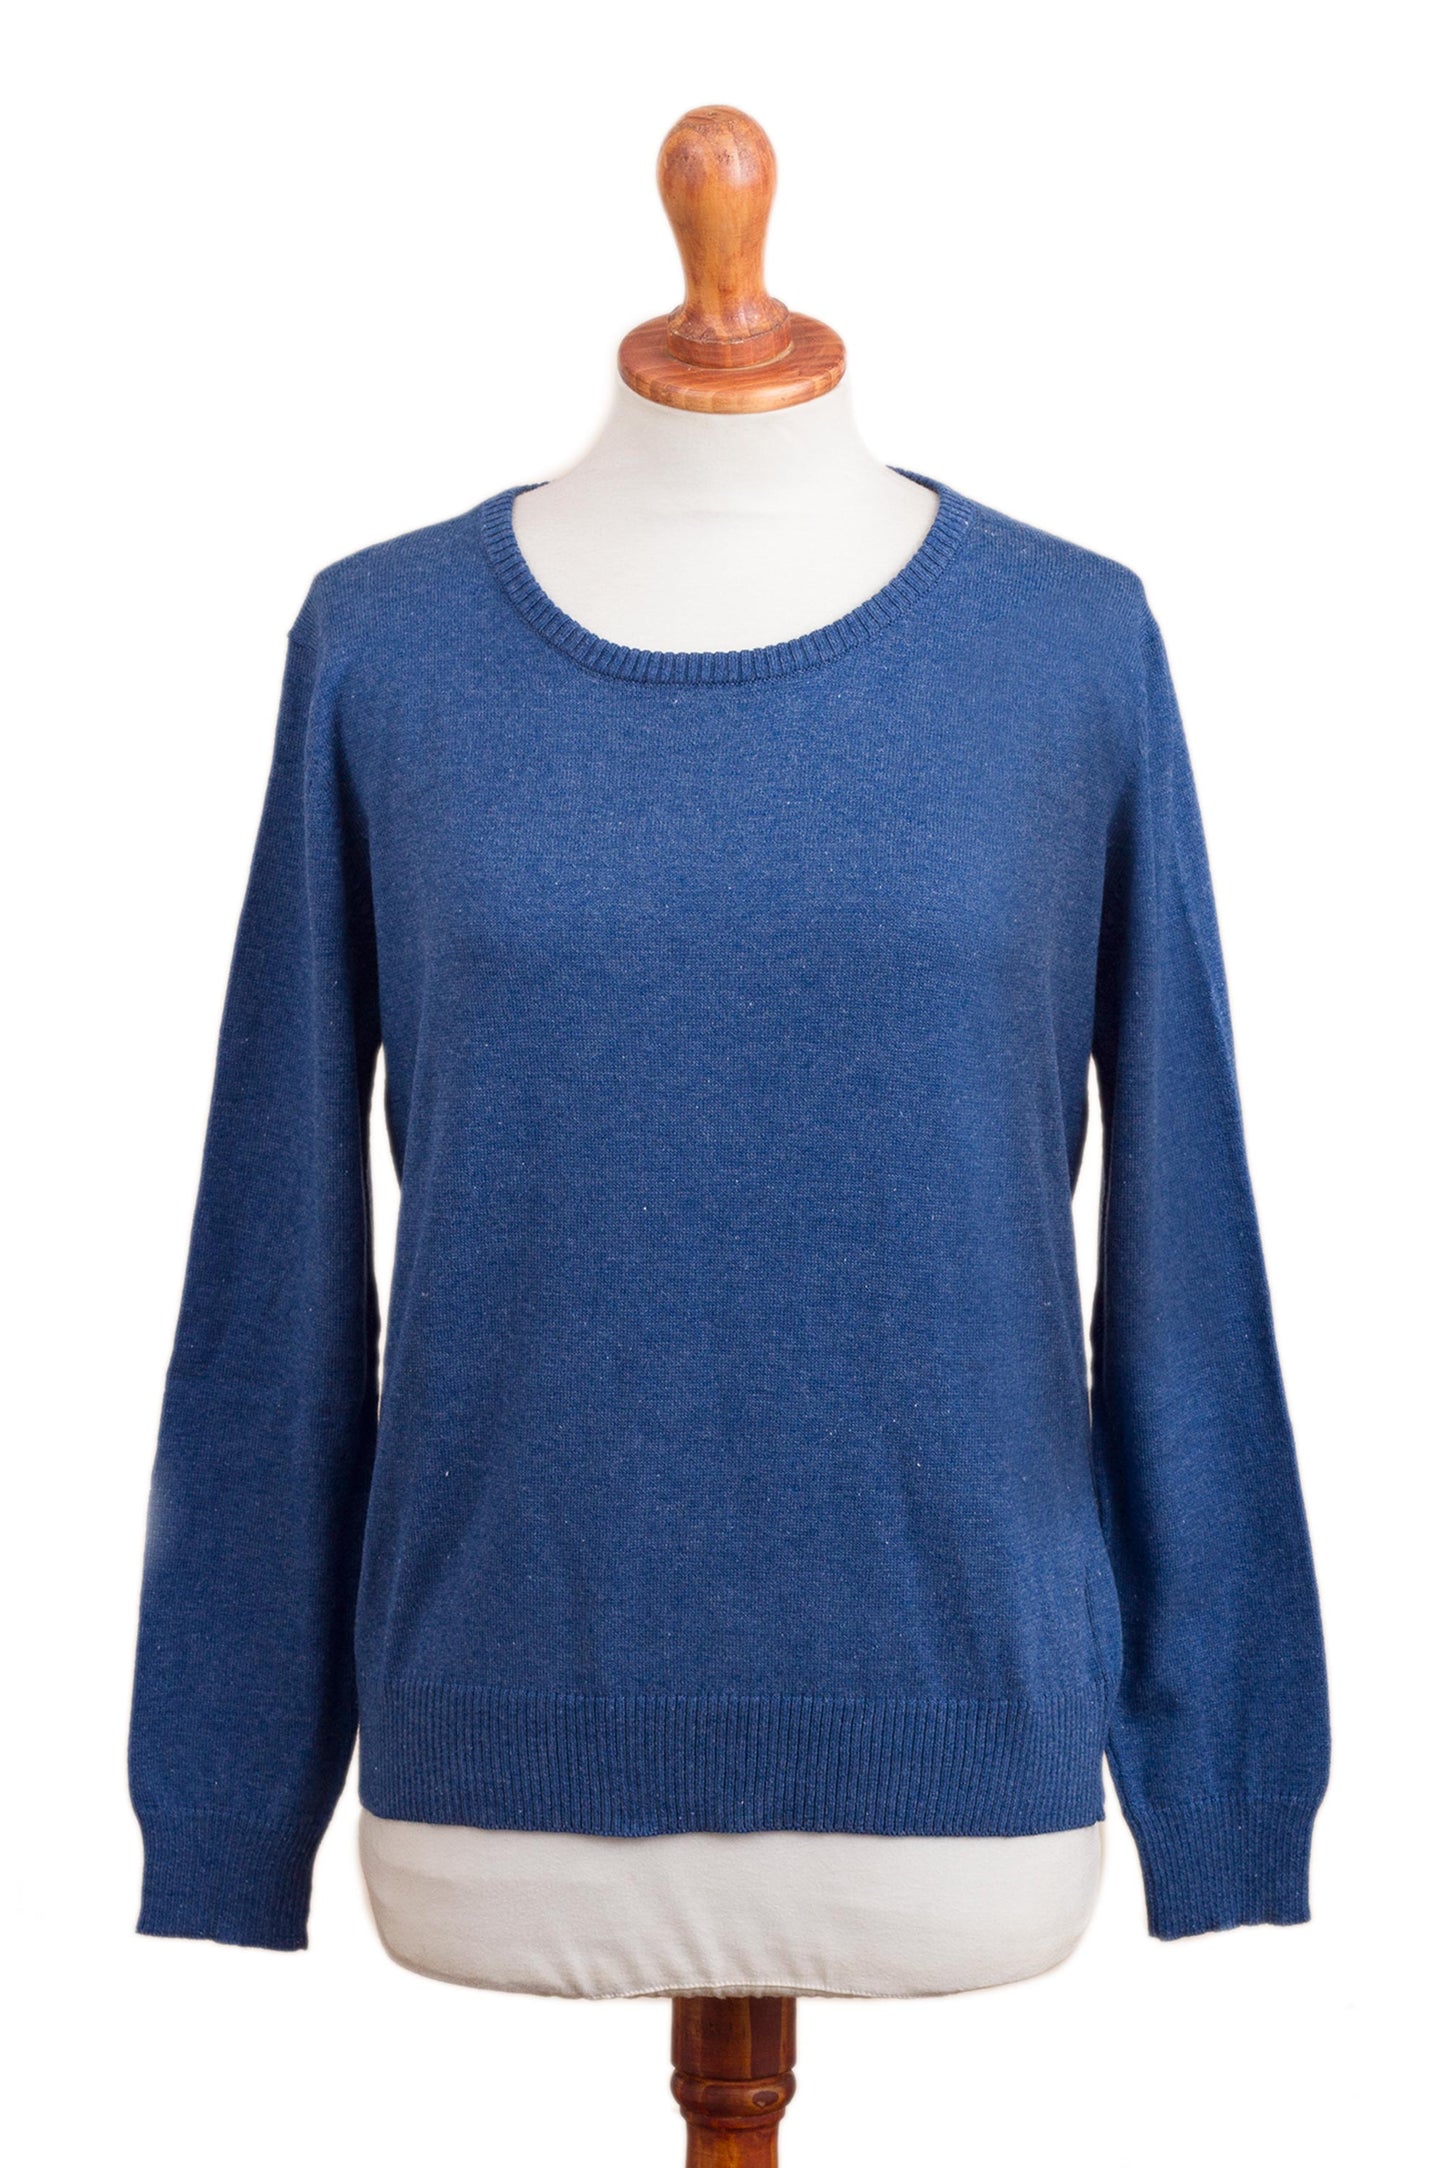 Warm Valley in Royal Blue Knit Cotton Blend Pullover in Royal Blue from Peru